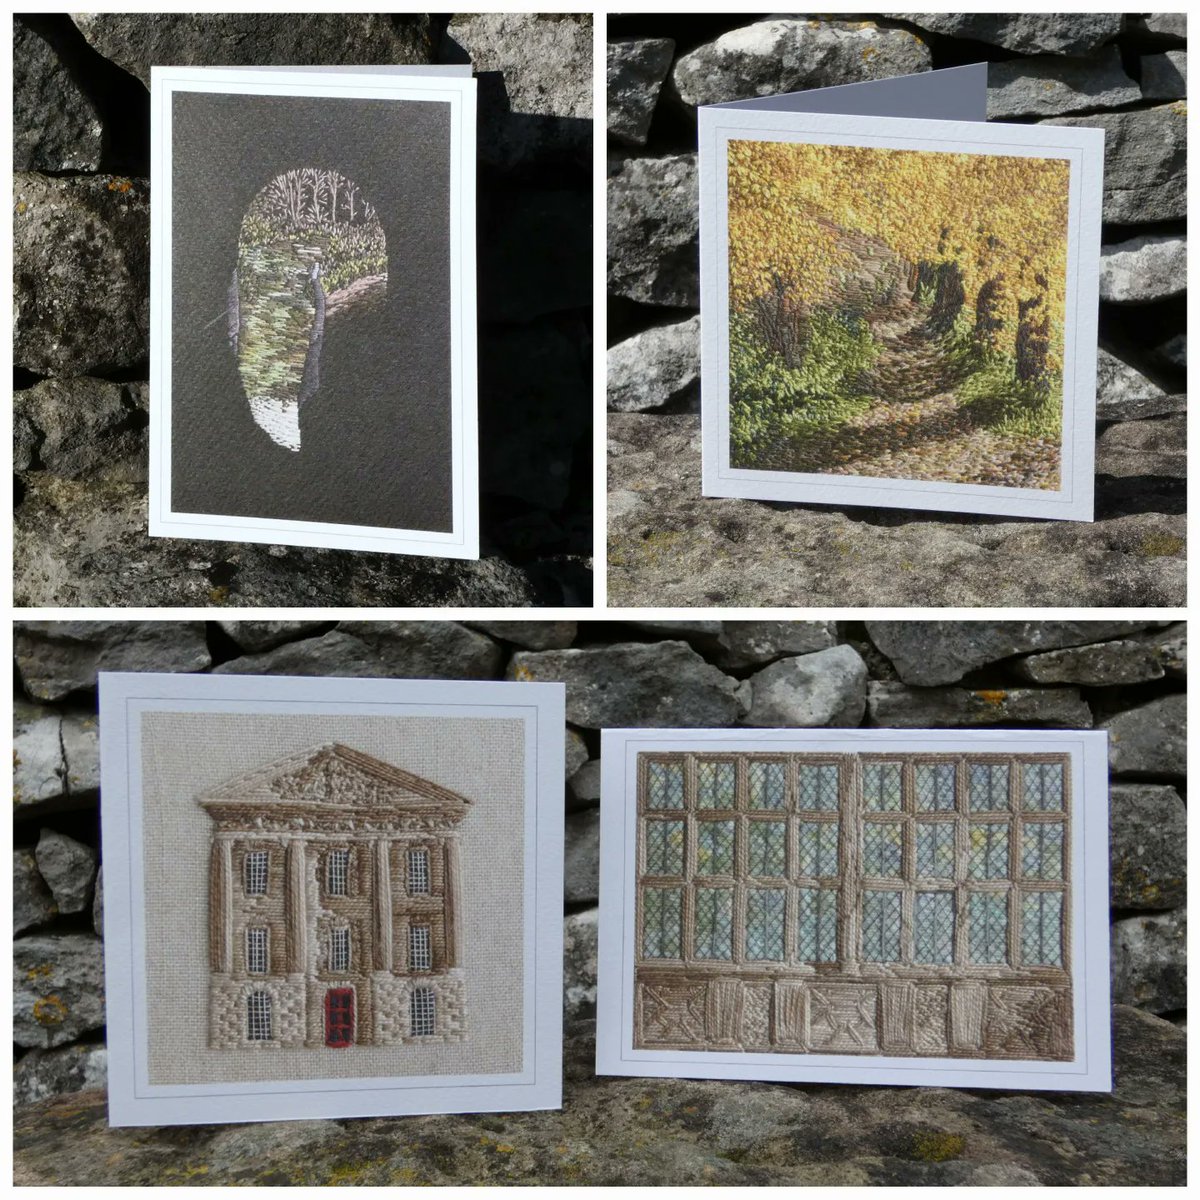 Sneak preview of some new #mixedmedia works which I will be bringing with me to the @PDArtisans #XmasArtFair at @sudburygasworks on 2/3 Dec. Mark your diary - not to be missed. I will also have lots of prints, #ACEO and greeting cards. Perfect for a little #christmasshopping